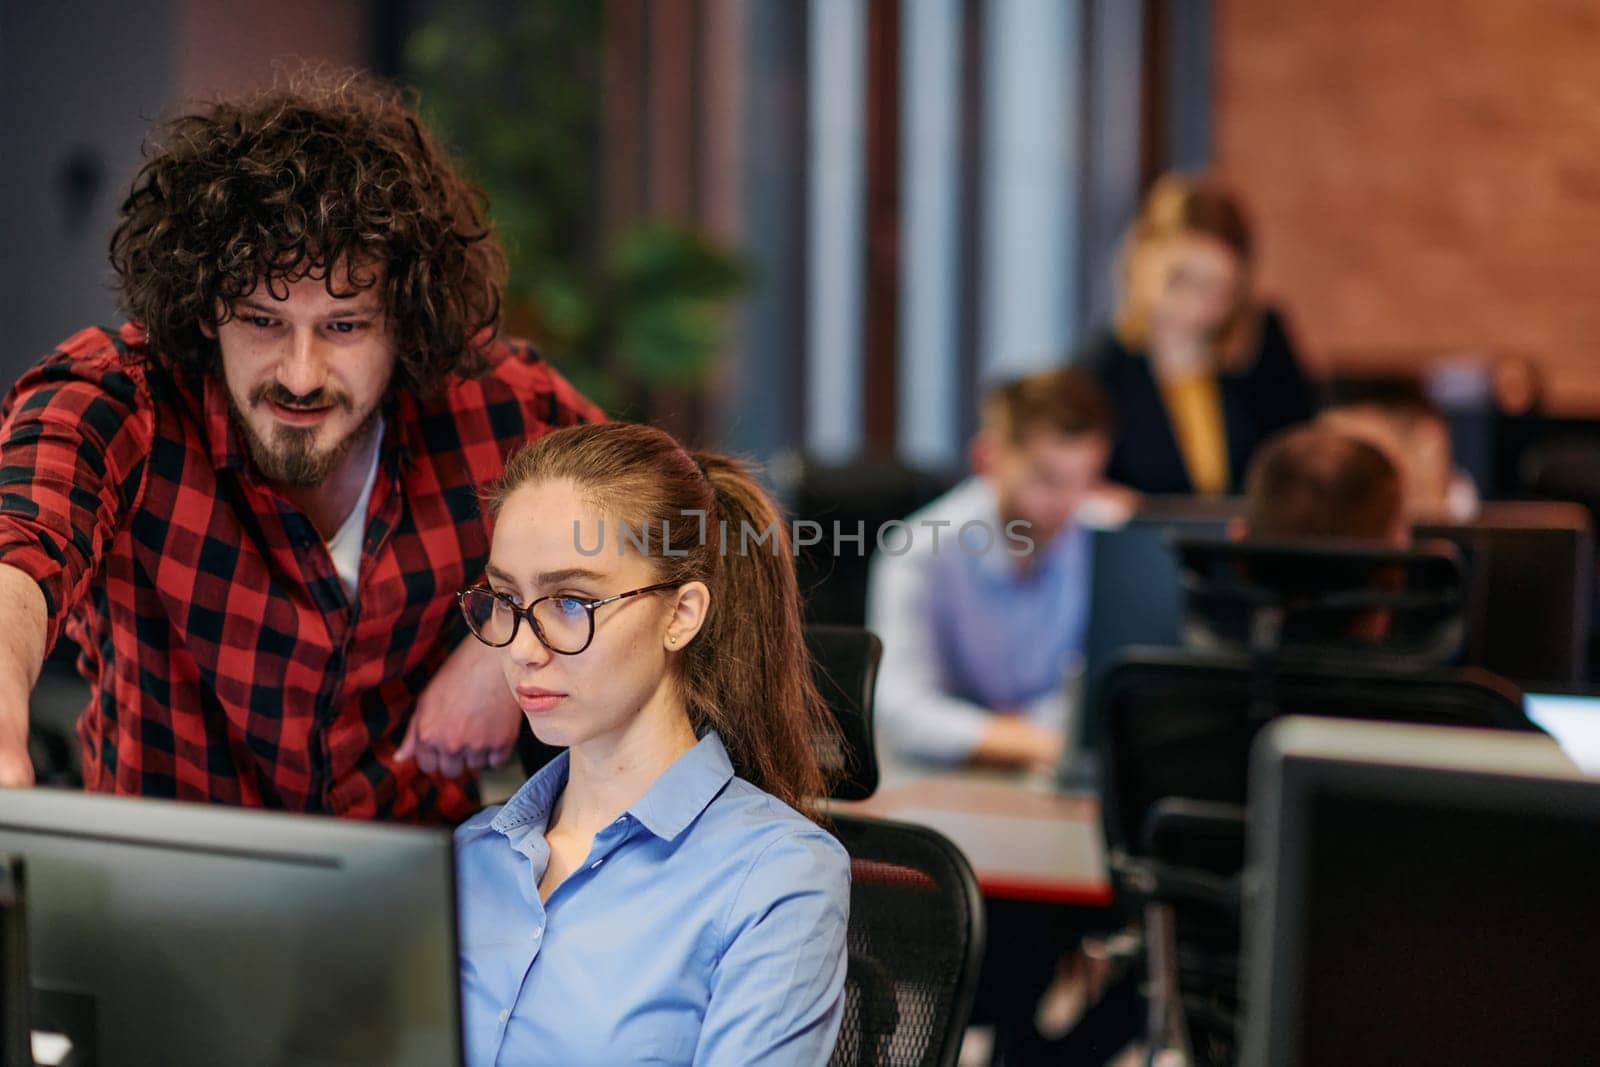 Business colleagues, a man and a woman, engage in discussing business strategies while attentively gazing at a computer monitor, epitomizing collaboration and innovation by dotshock